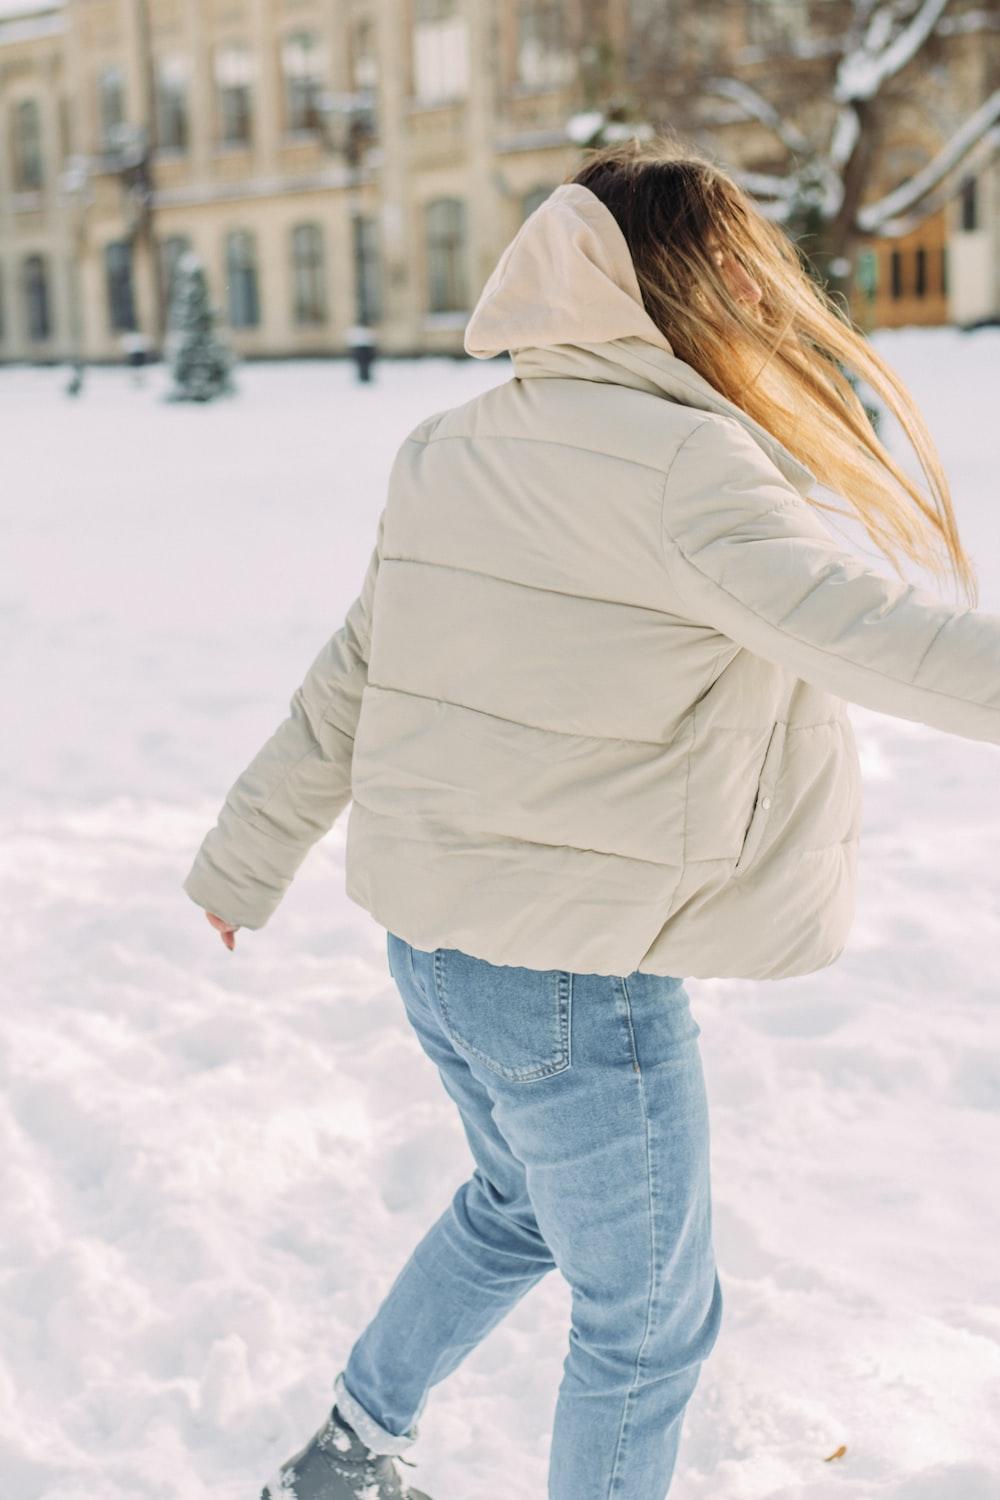 Casual Winter Outfits For Teenage Girl: 10 Best Ideas - The Kosha Journal